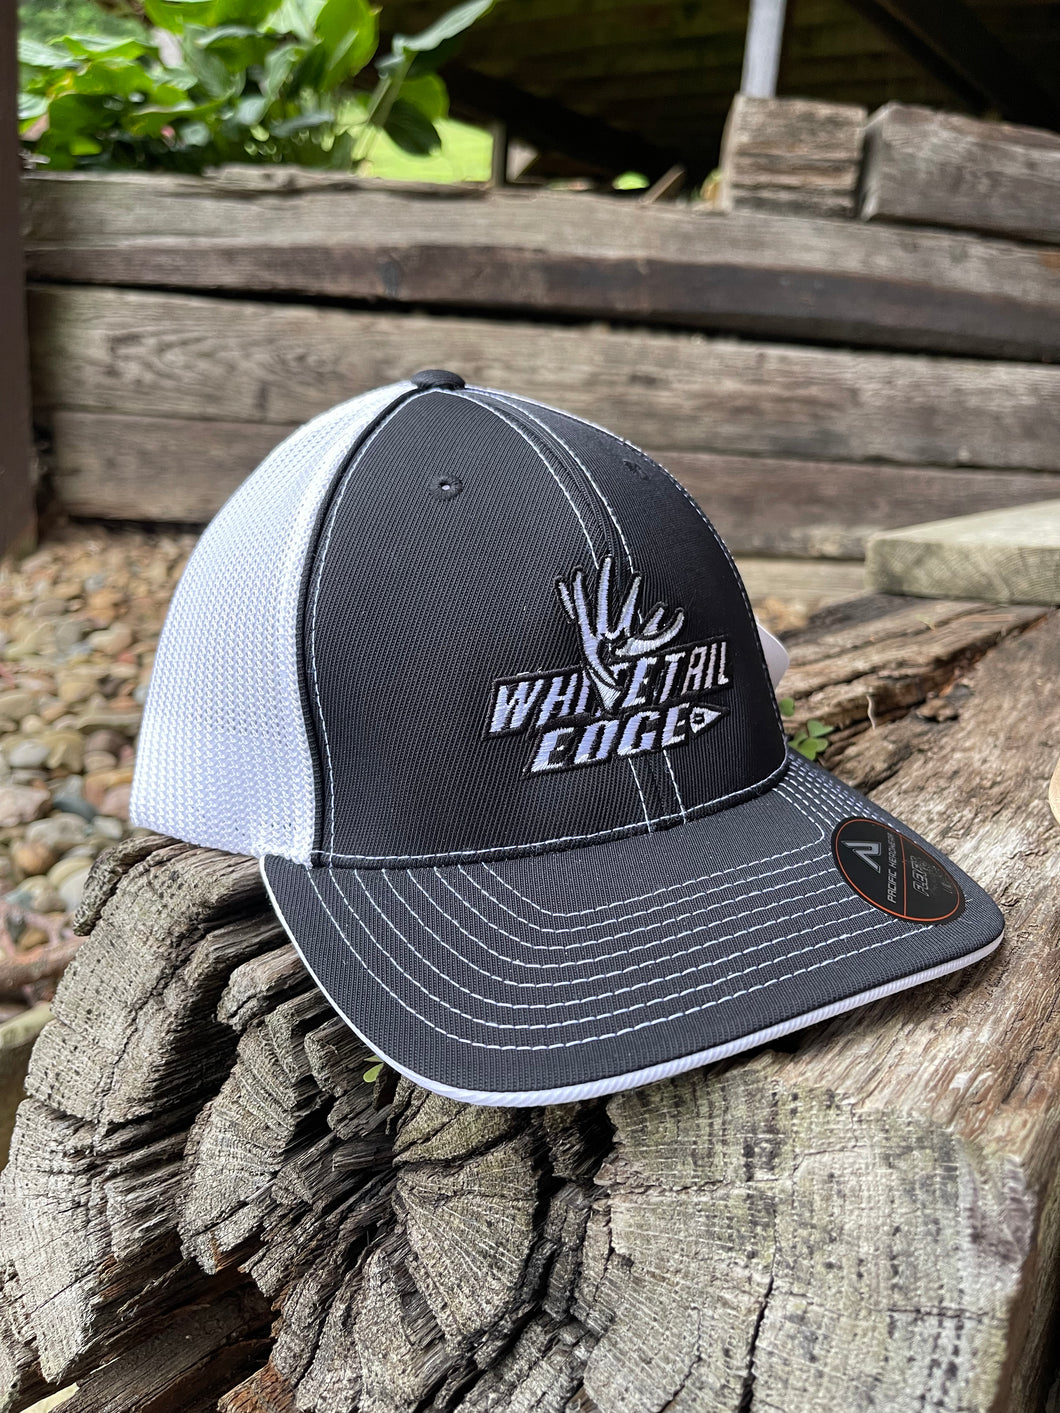 Whitetail Edge fitted